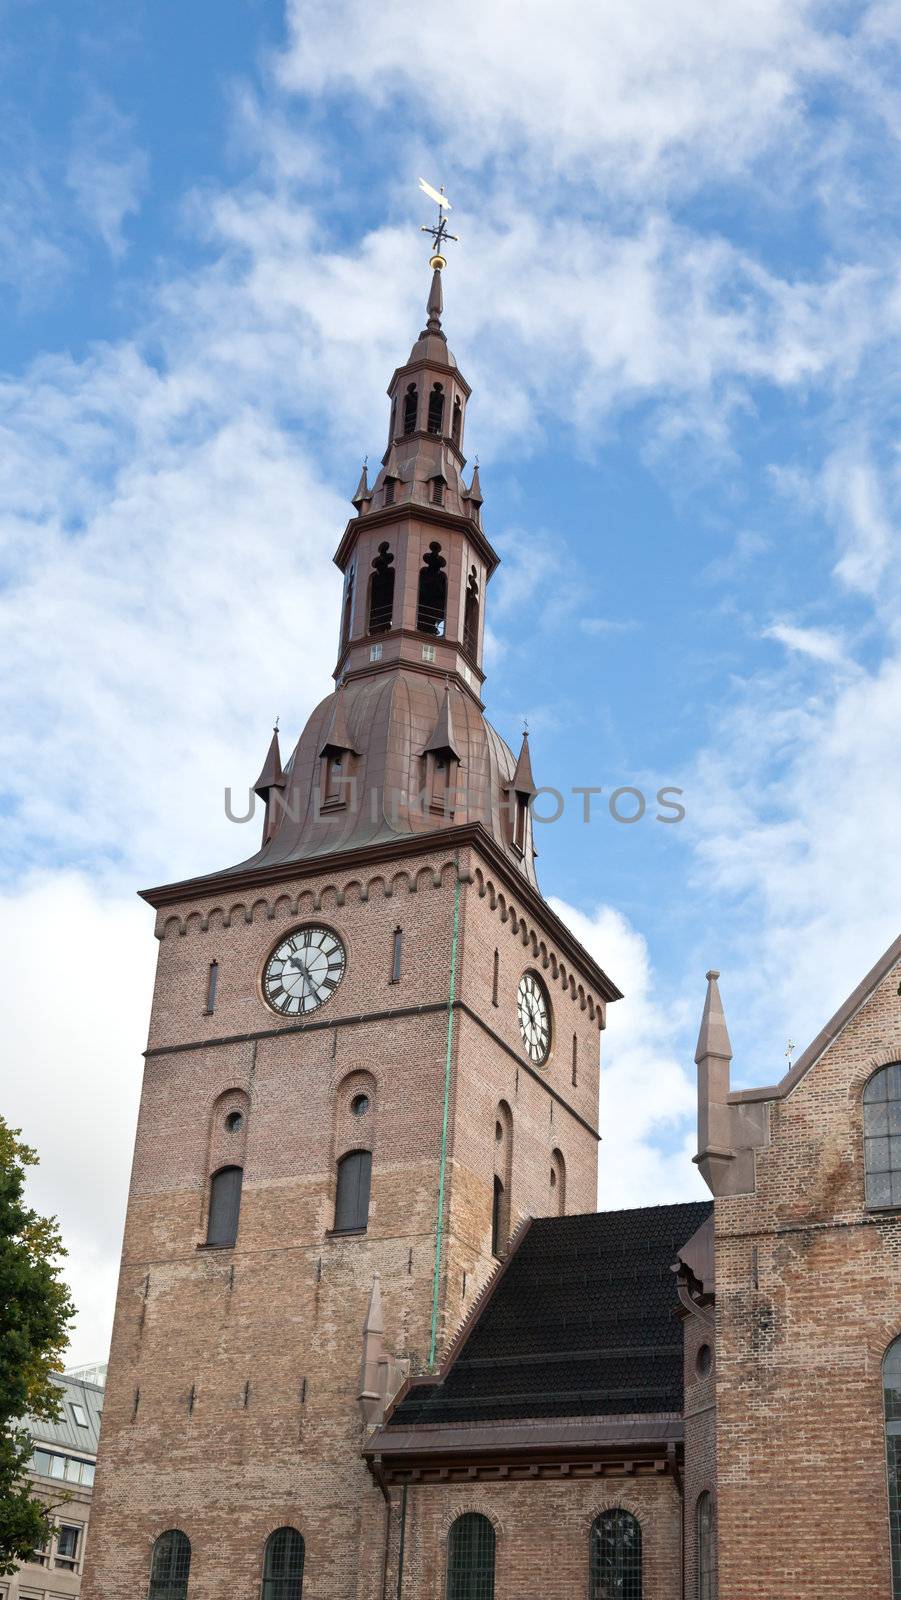 The Domkirken church in central Oslo, Norway